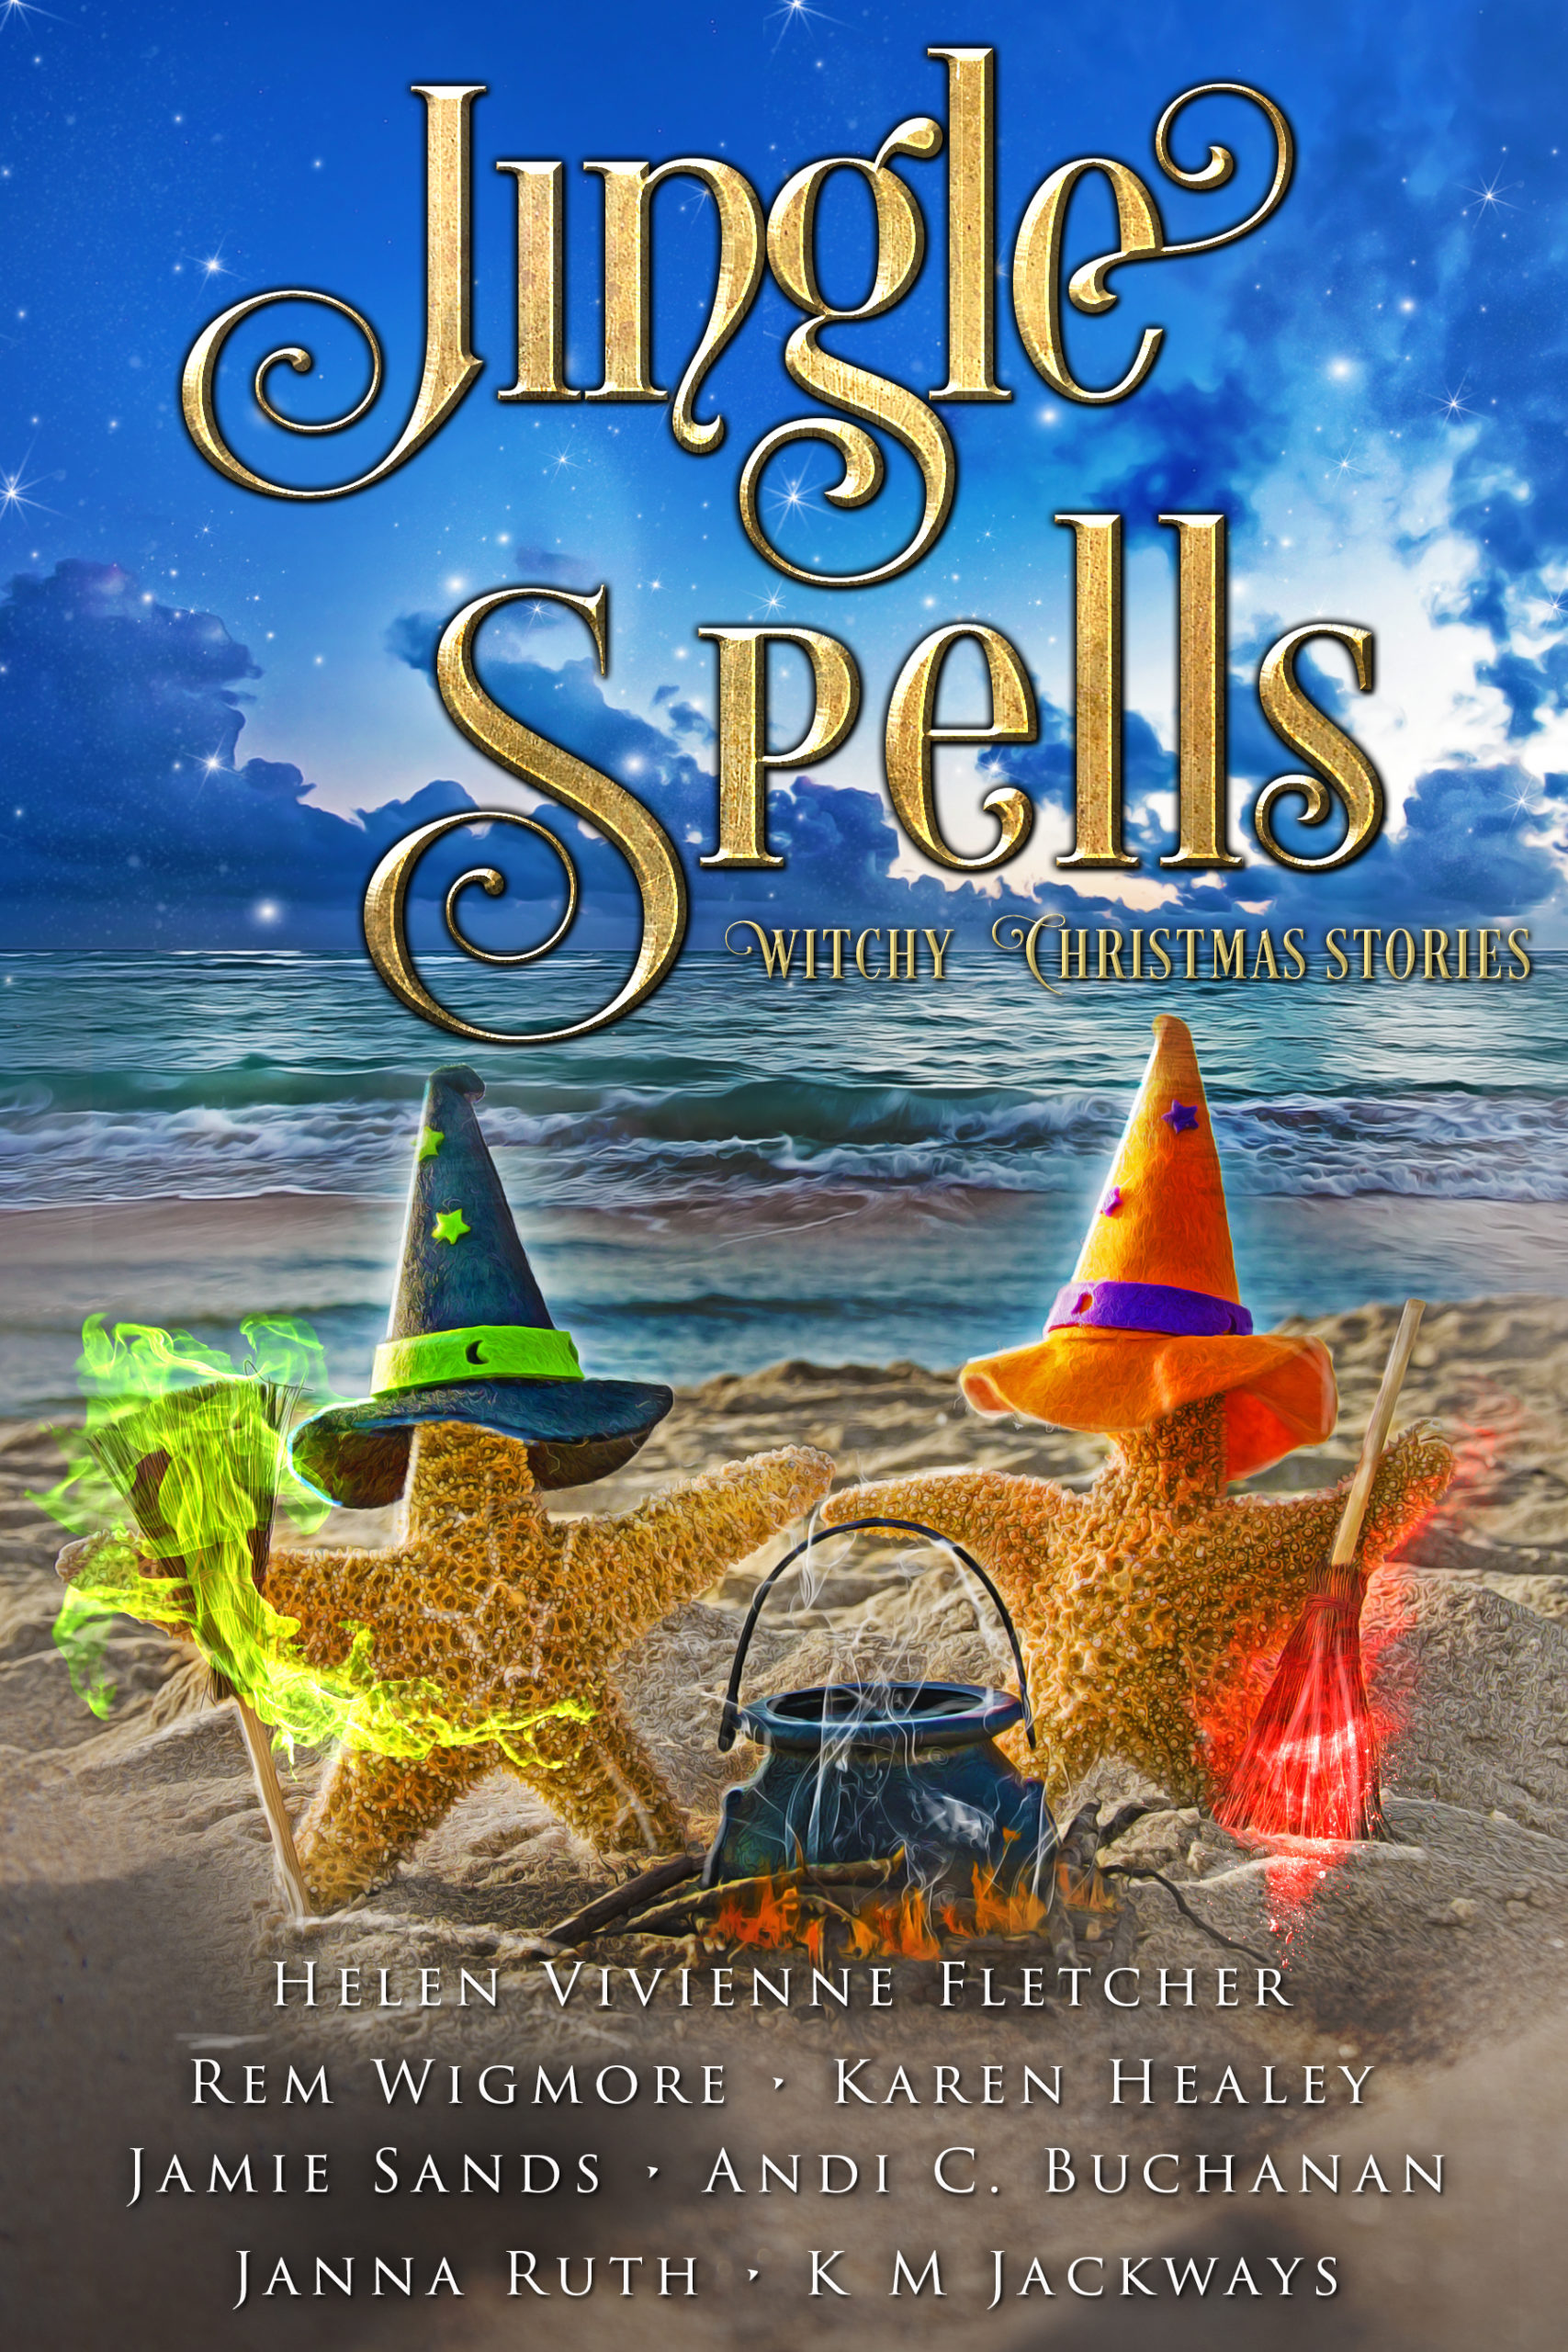 A view of the ocean from a beach, with gold curlicue lettering reading "Jingle Spells: A Witchy Fiction Anthology". In the foreground, two starfish wearing witches' hats, one with a glowing staff and the other with a broomstick, have a cauldron over a beach bonfire.